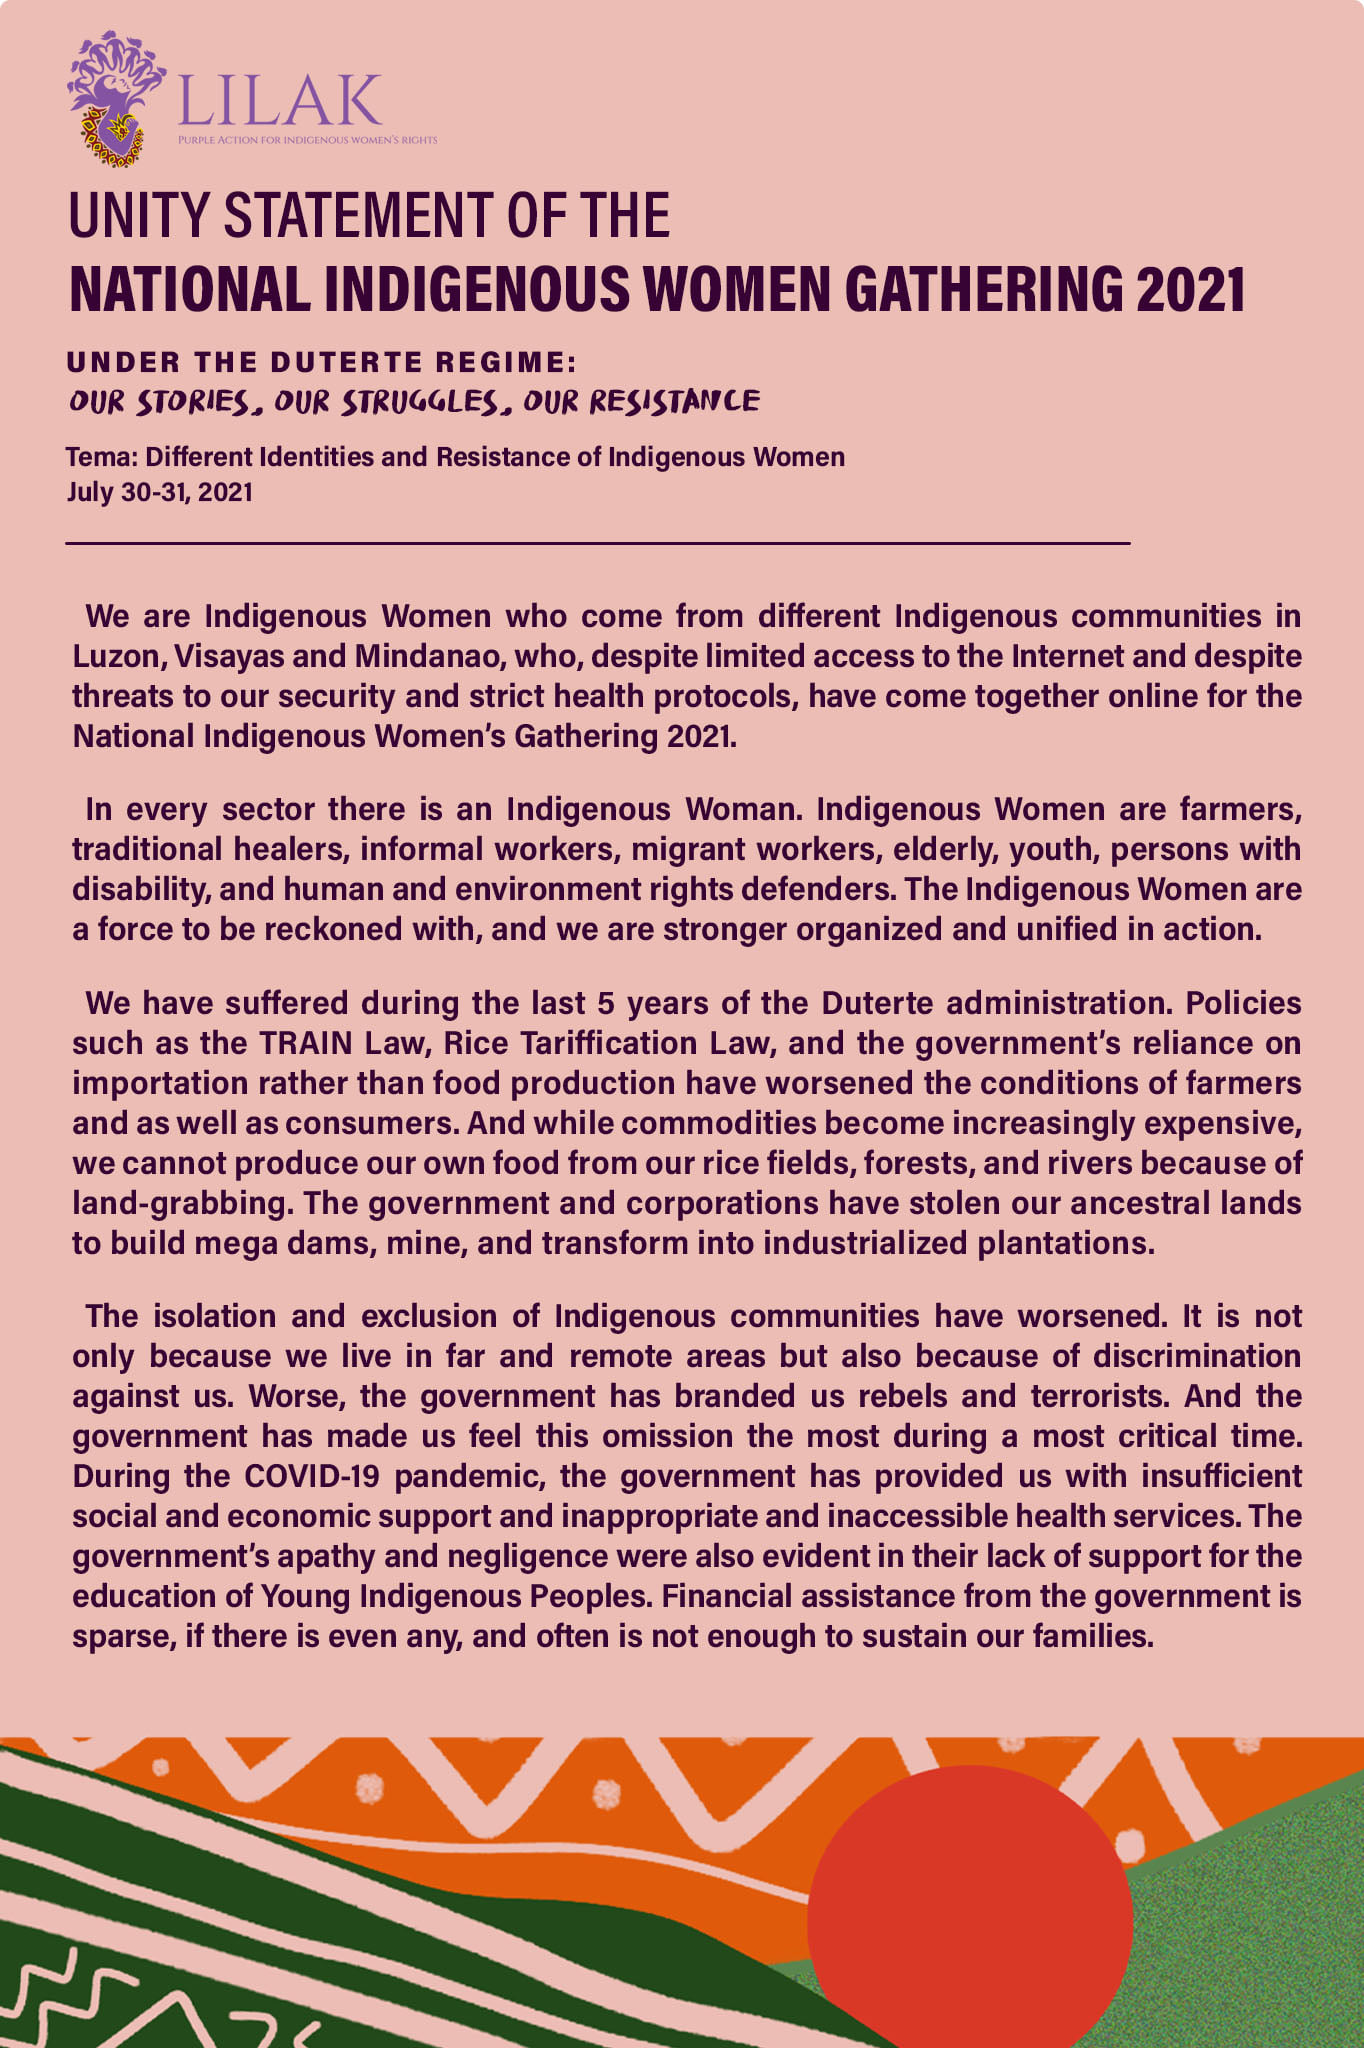 Philippines Unity Statement of the National Indigenous Women’s